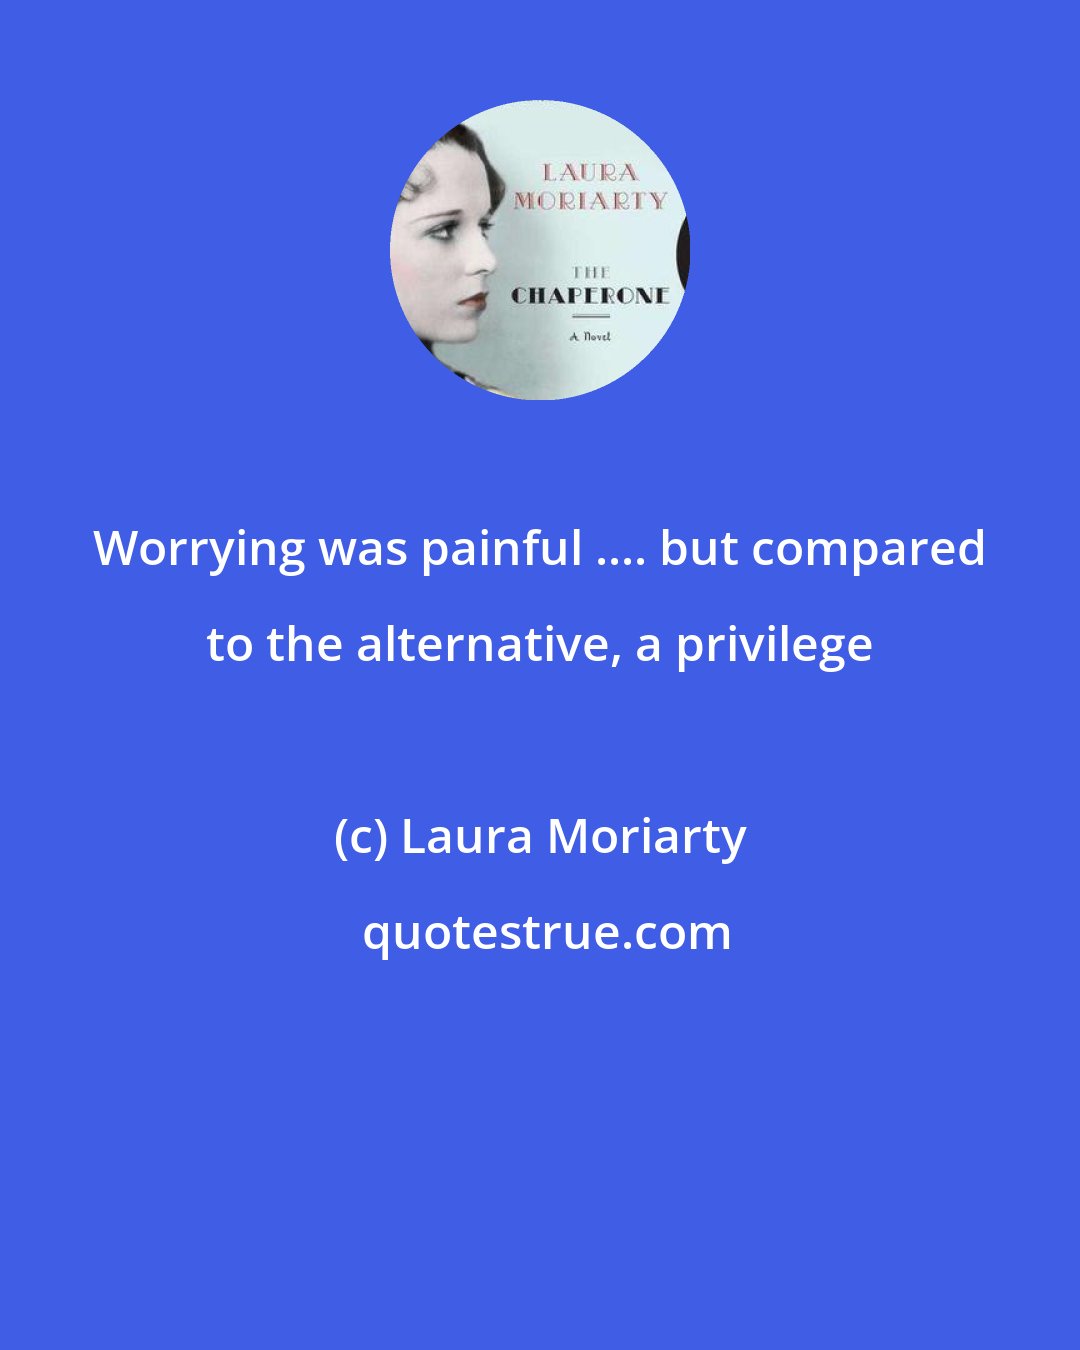 Laura Moriarty: Worrying was painful .... but compared to the alternative, a privilege